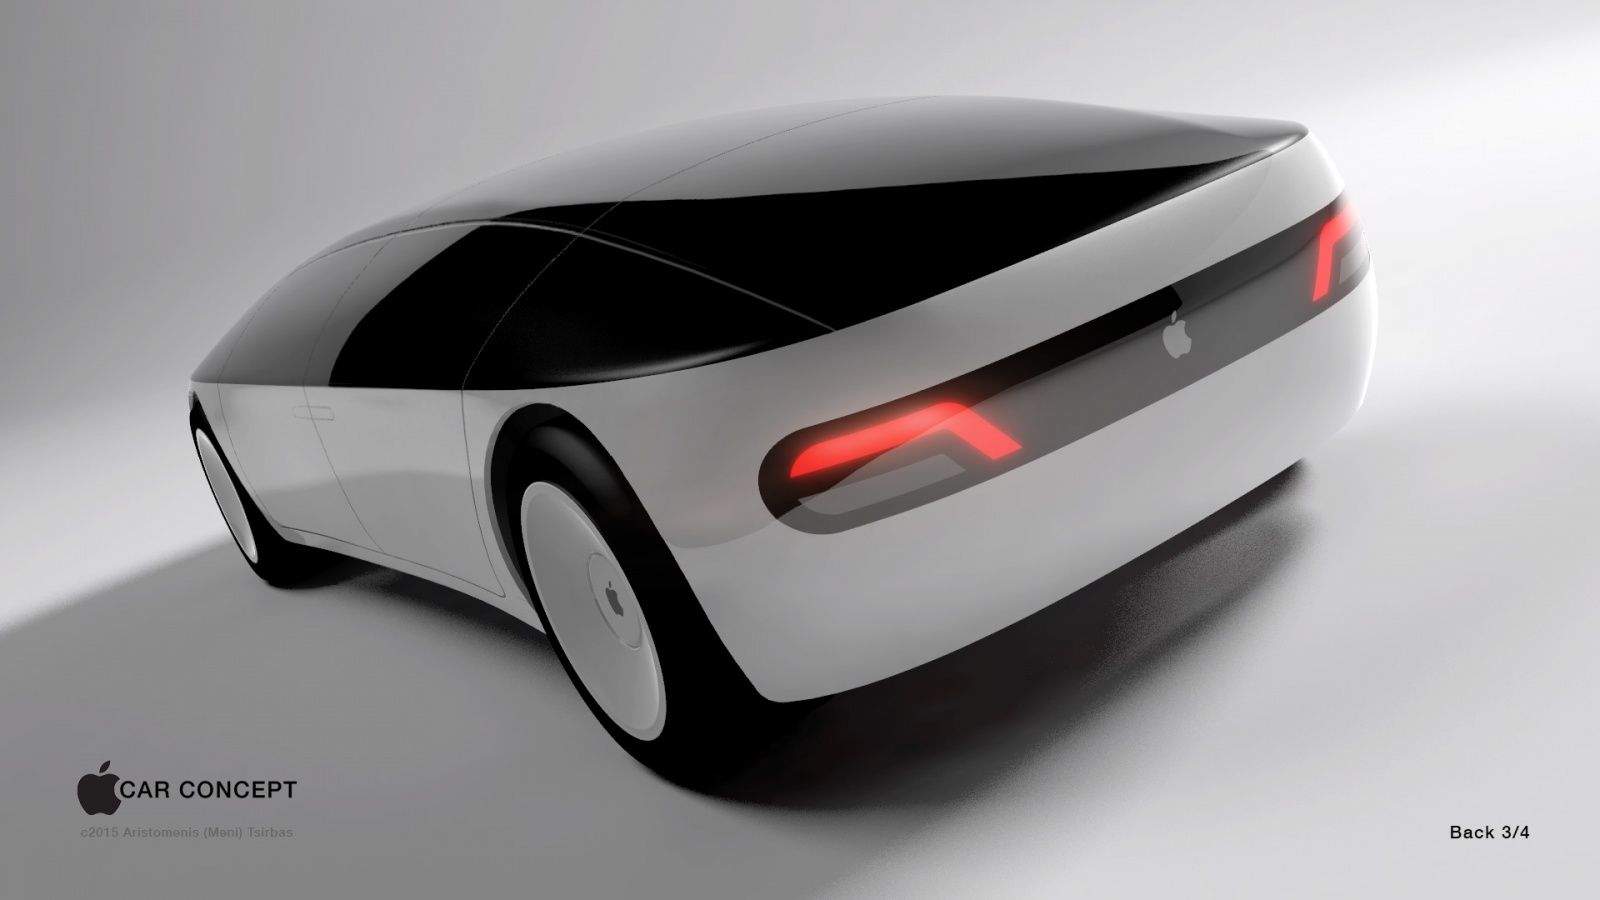 Apple car concept art shows what Cupertino might put on the road.